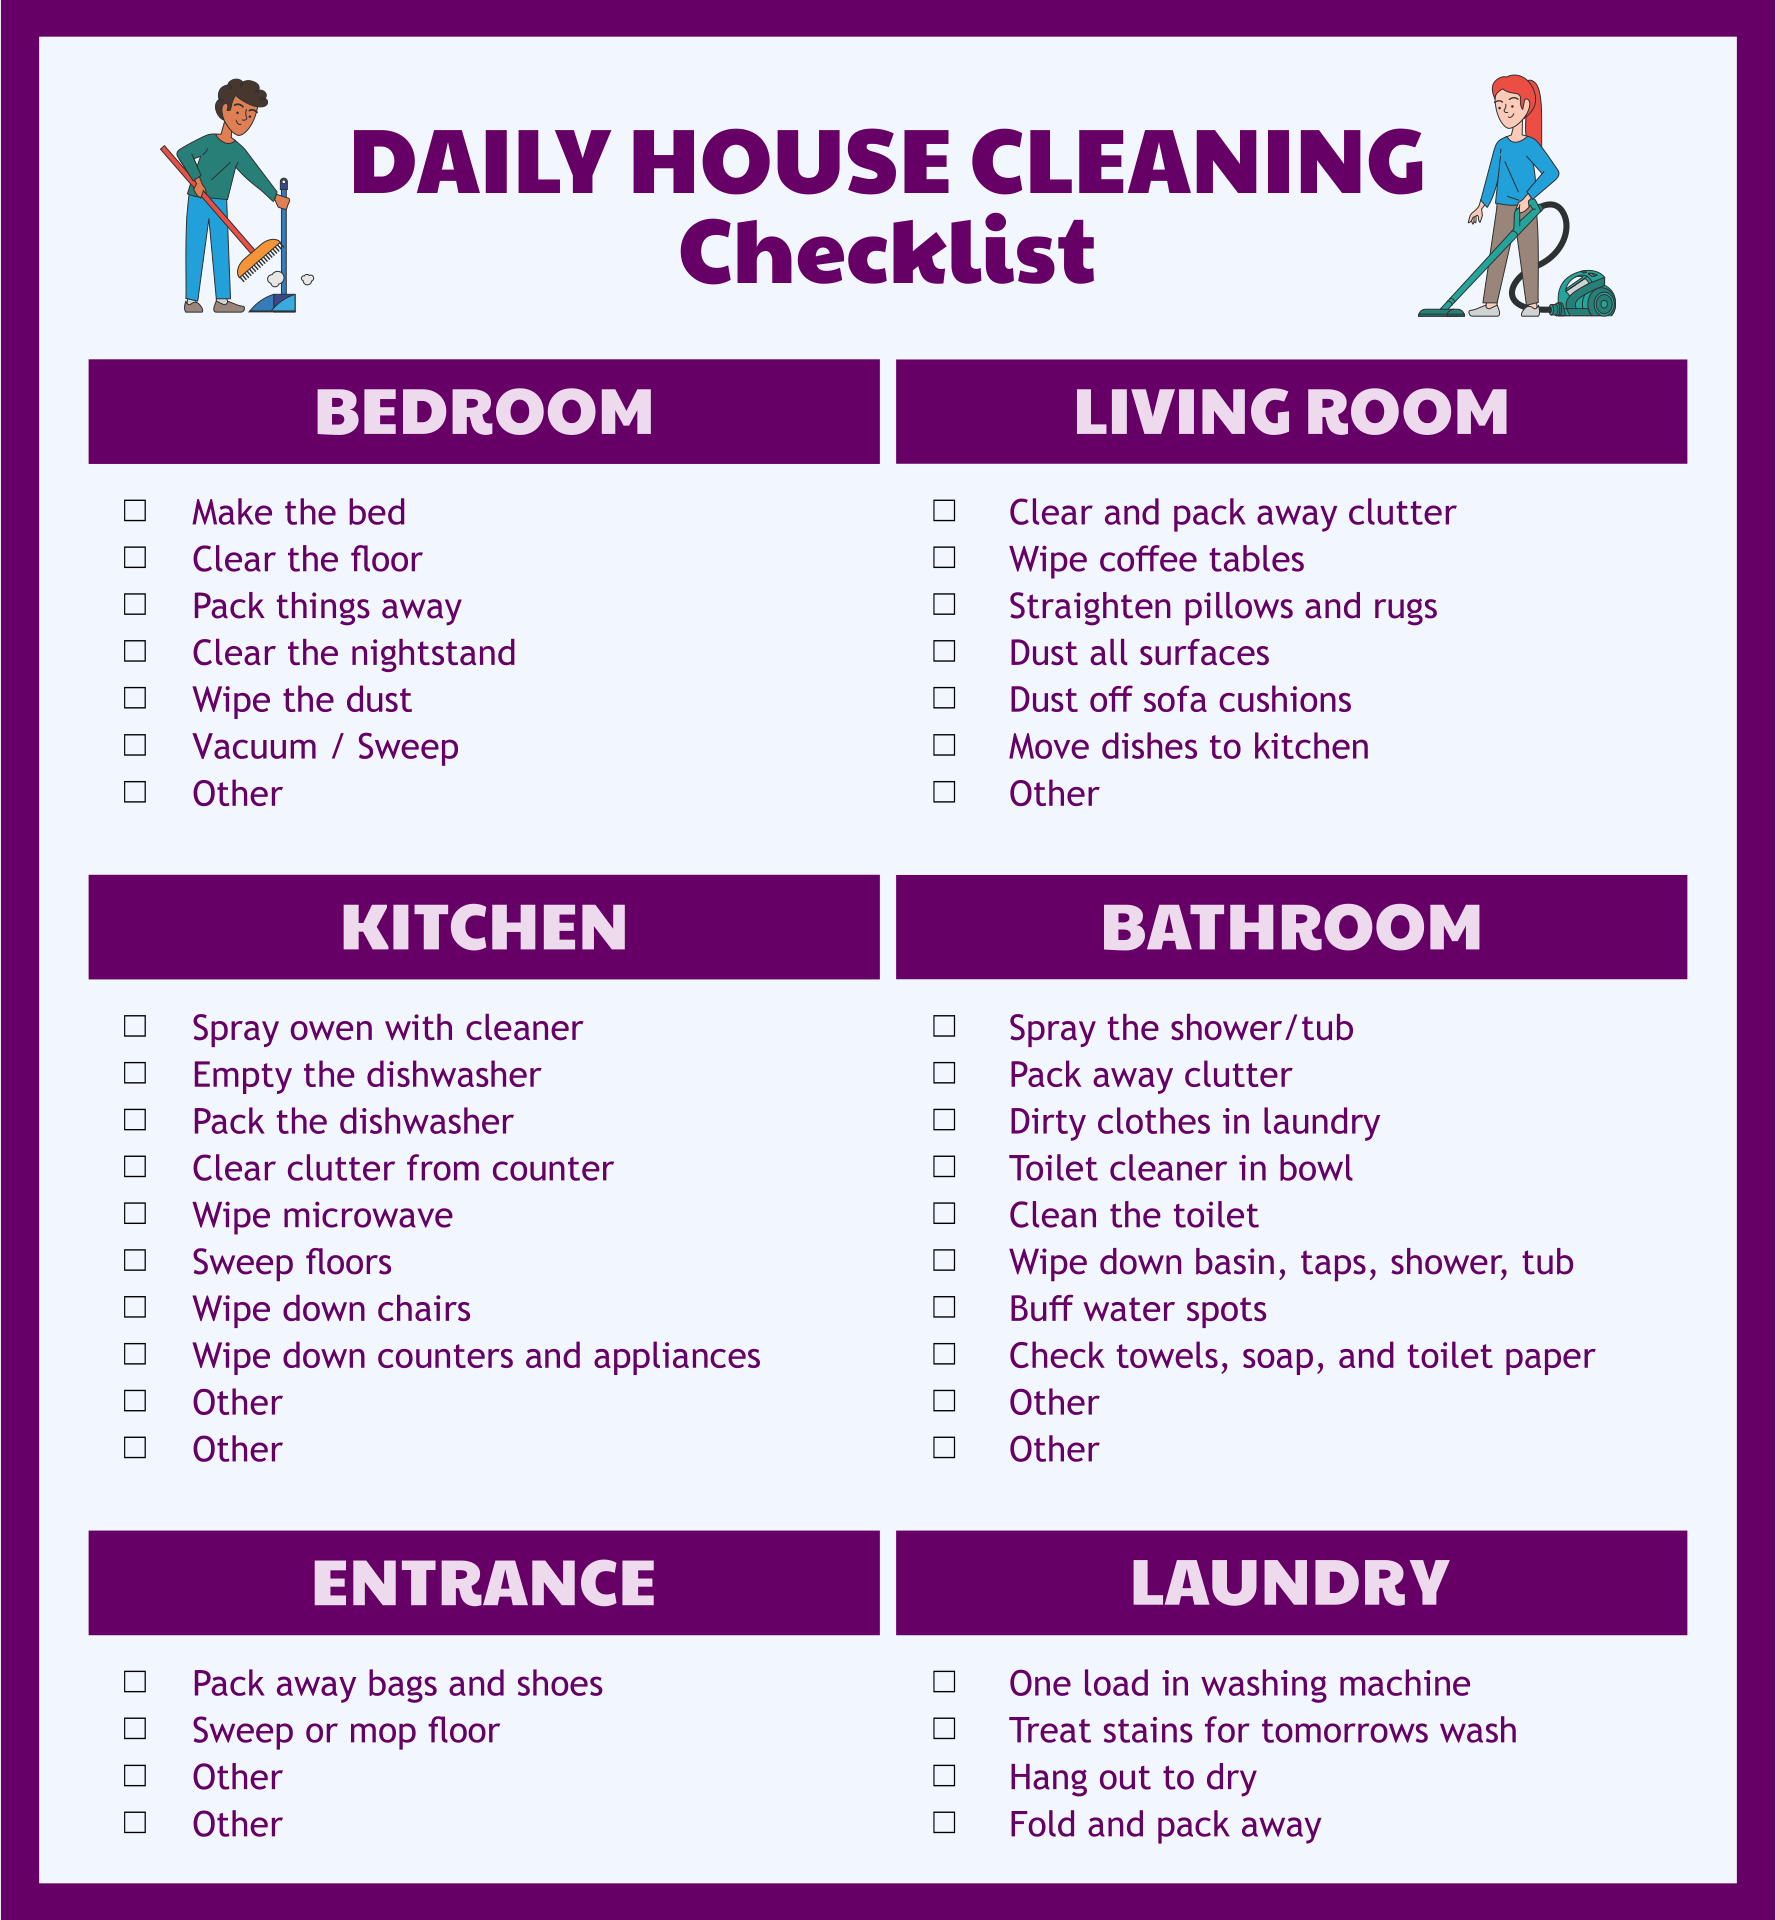 9-best-images-of-hotel-housekeeping-checklist-printable-housekeeping-cleaning-checklist